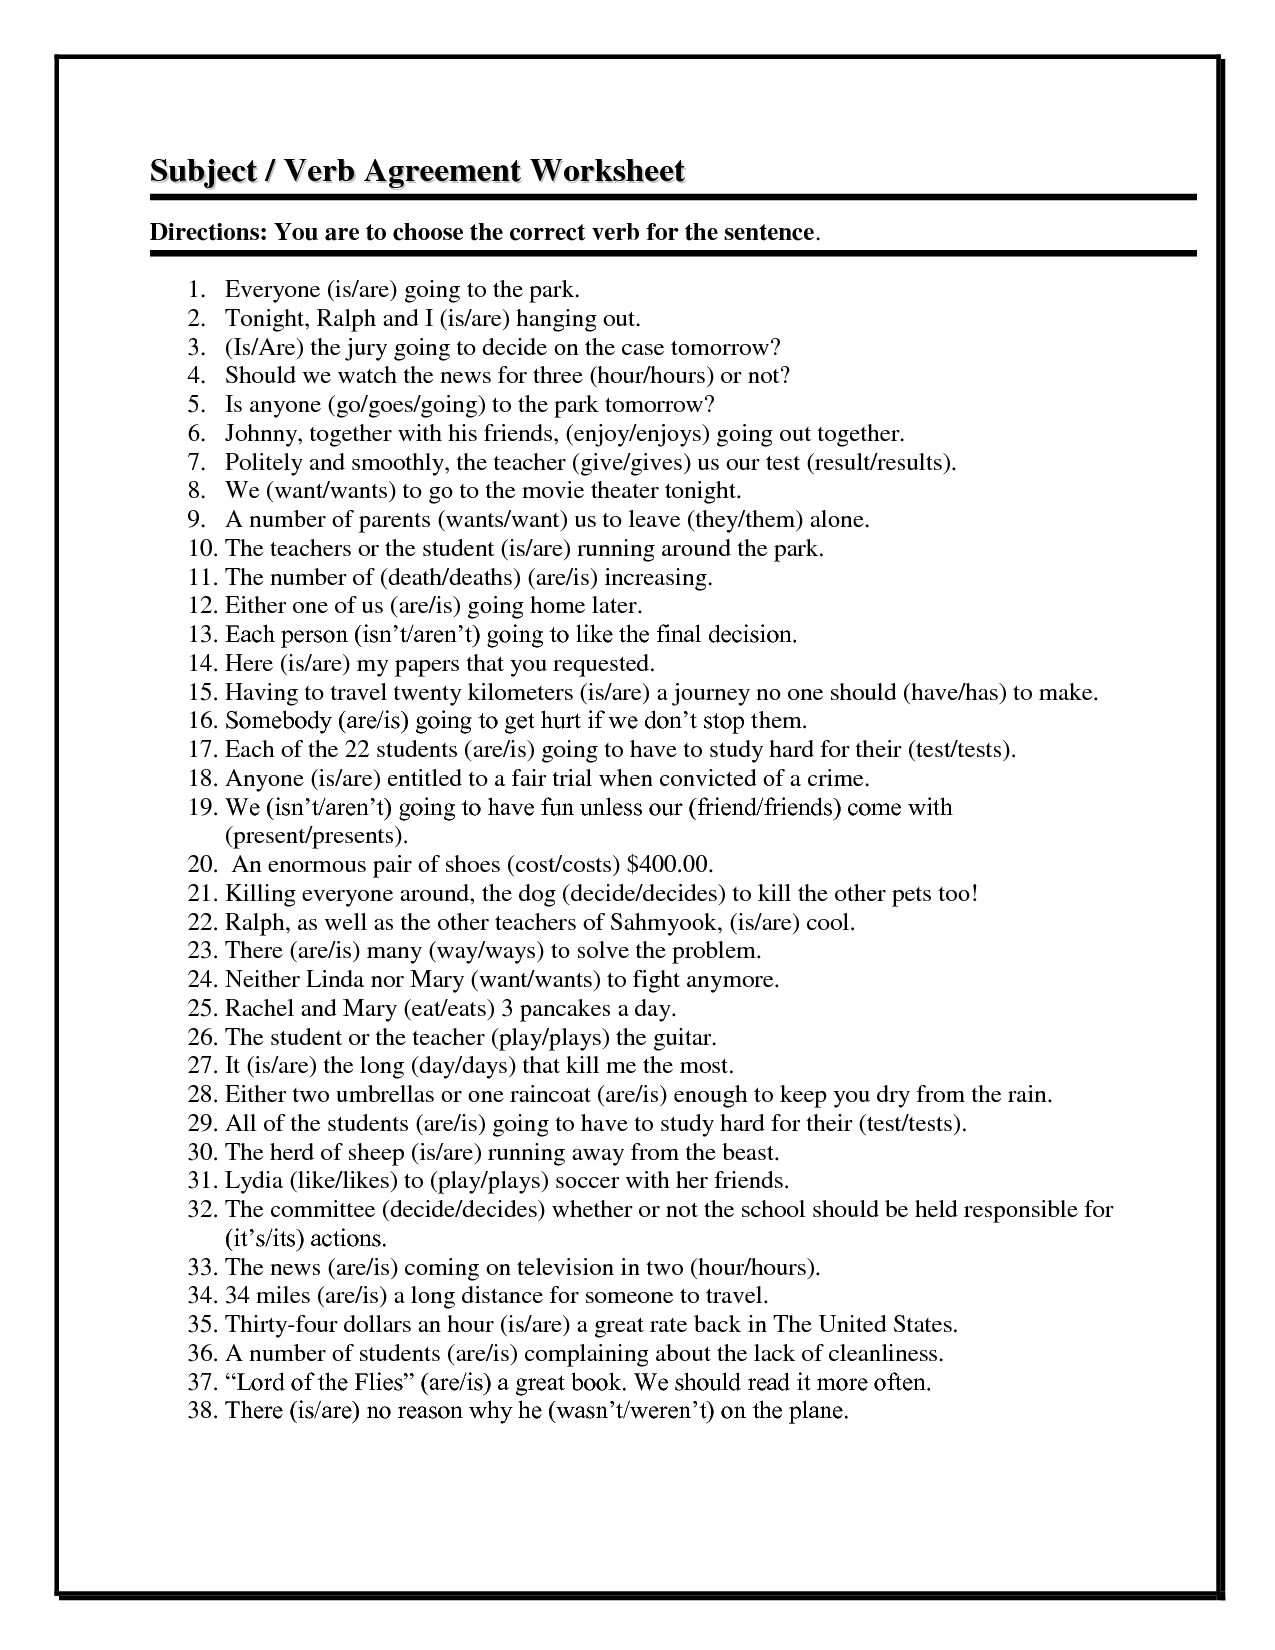 12 Best Images Of Subject Verb Agreement Worksheets 3rd Grade Mall Scavenger Hunt Party